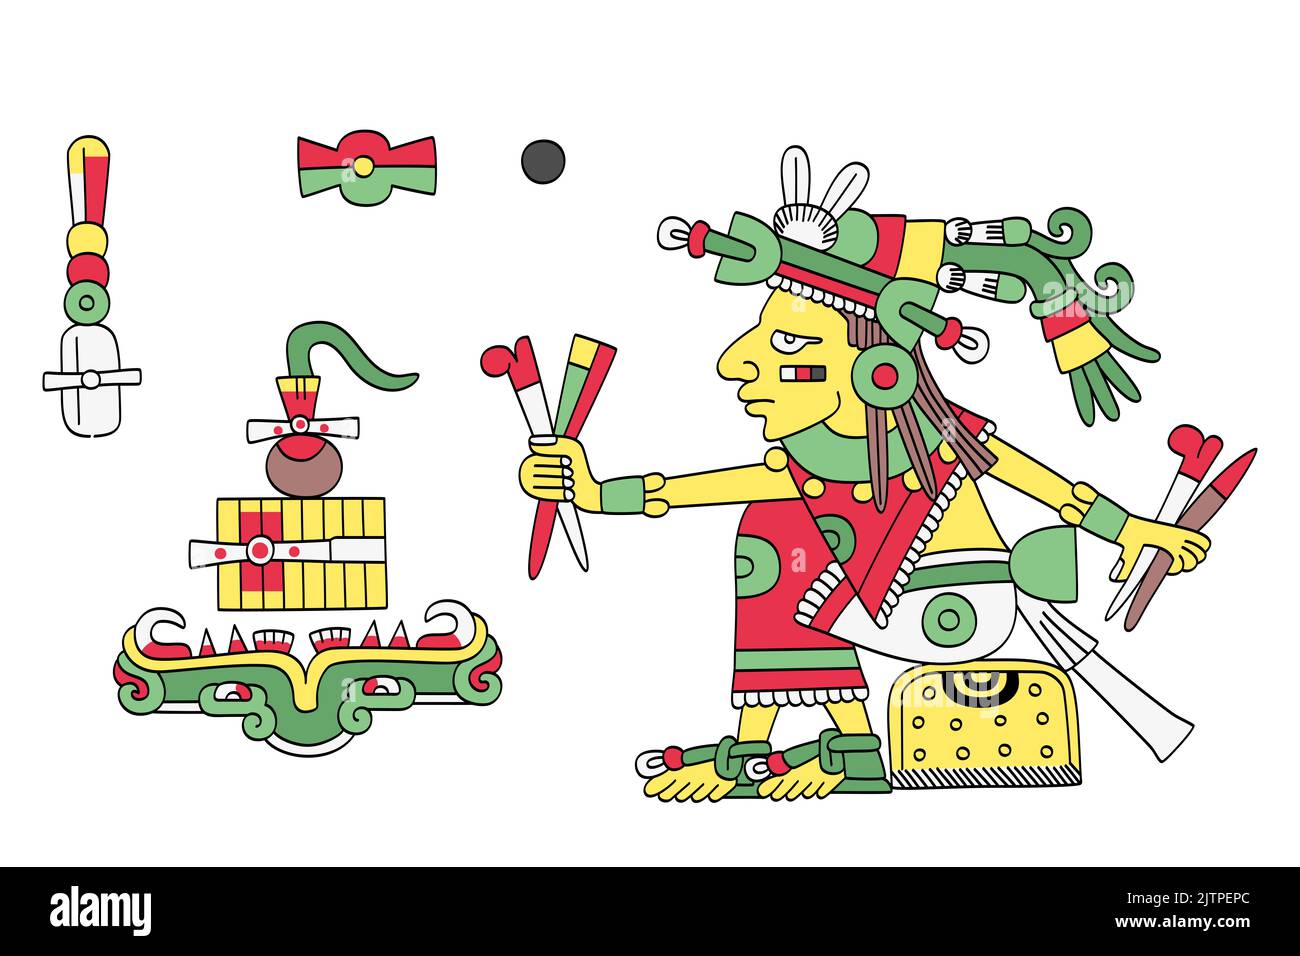 Cinteotl, Aztec god of maize, in front of the realm of the dead. Maize deity in Aztec mythology, also known as Centeotl and Centeocihuatl. Stock Photo